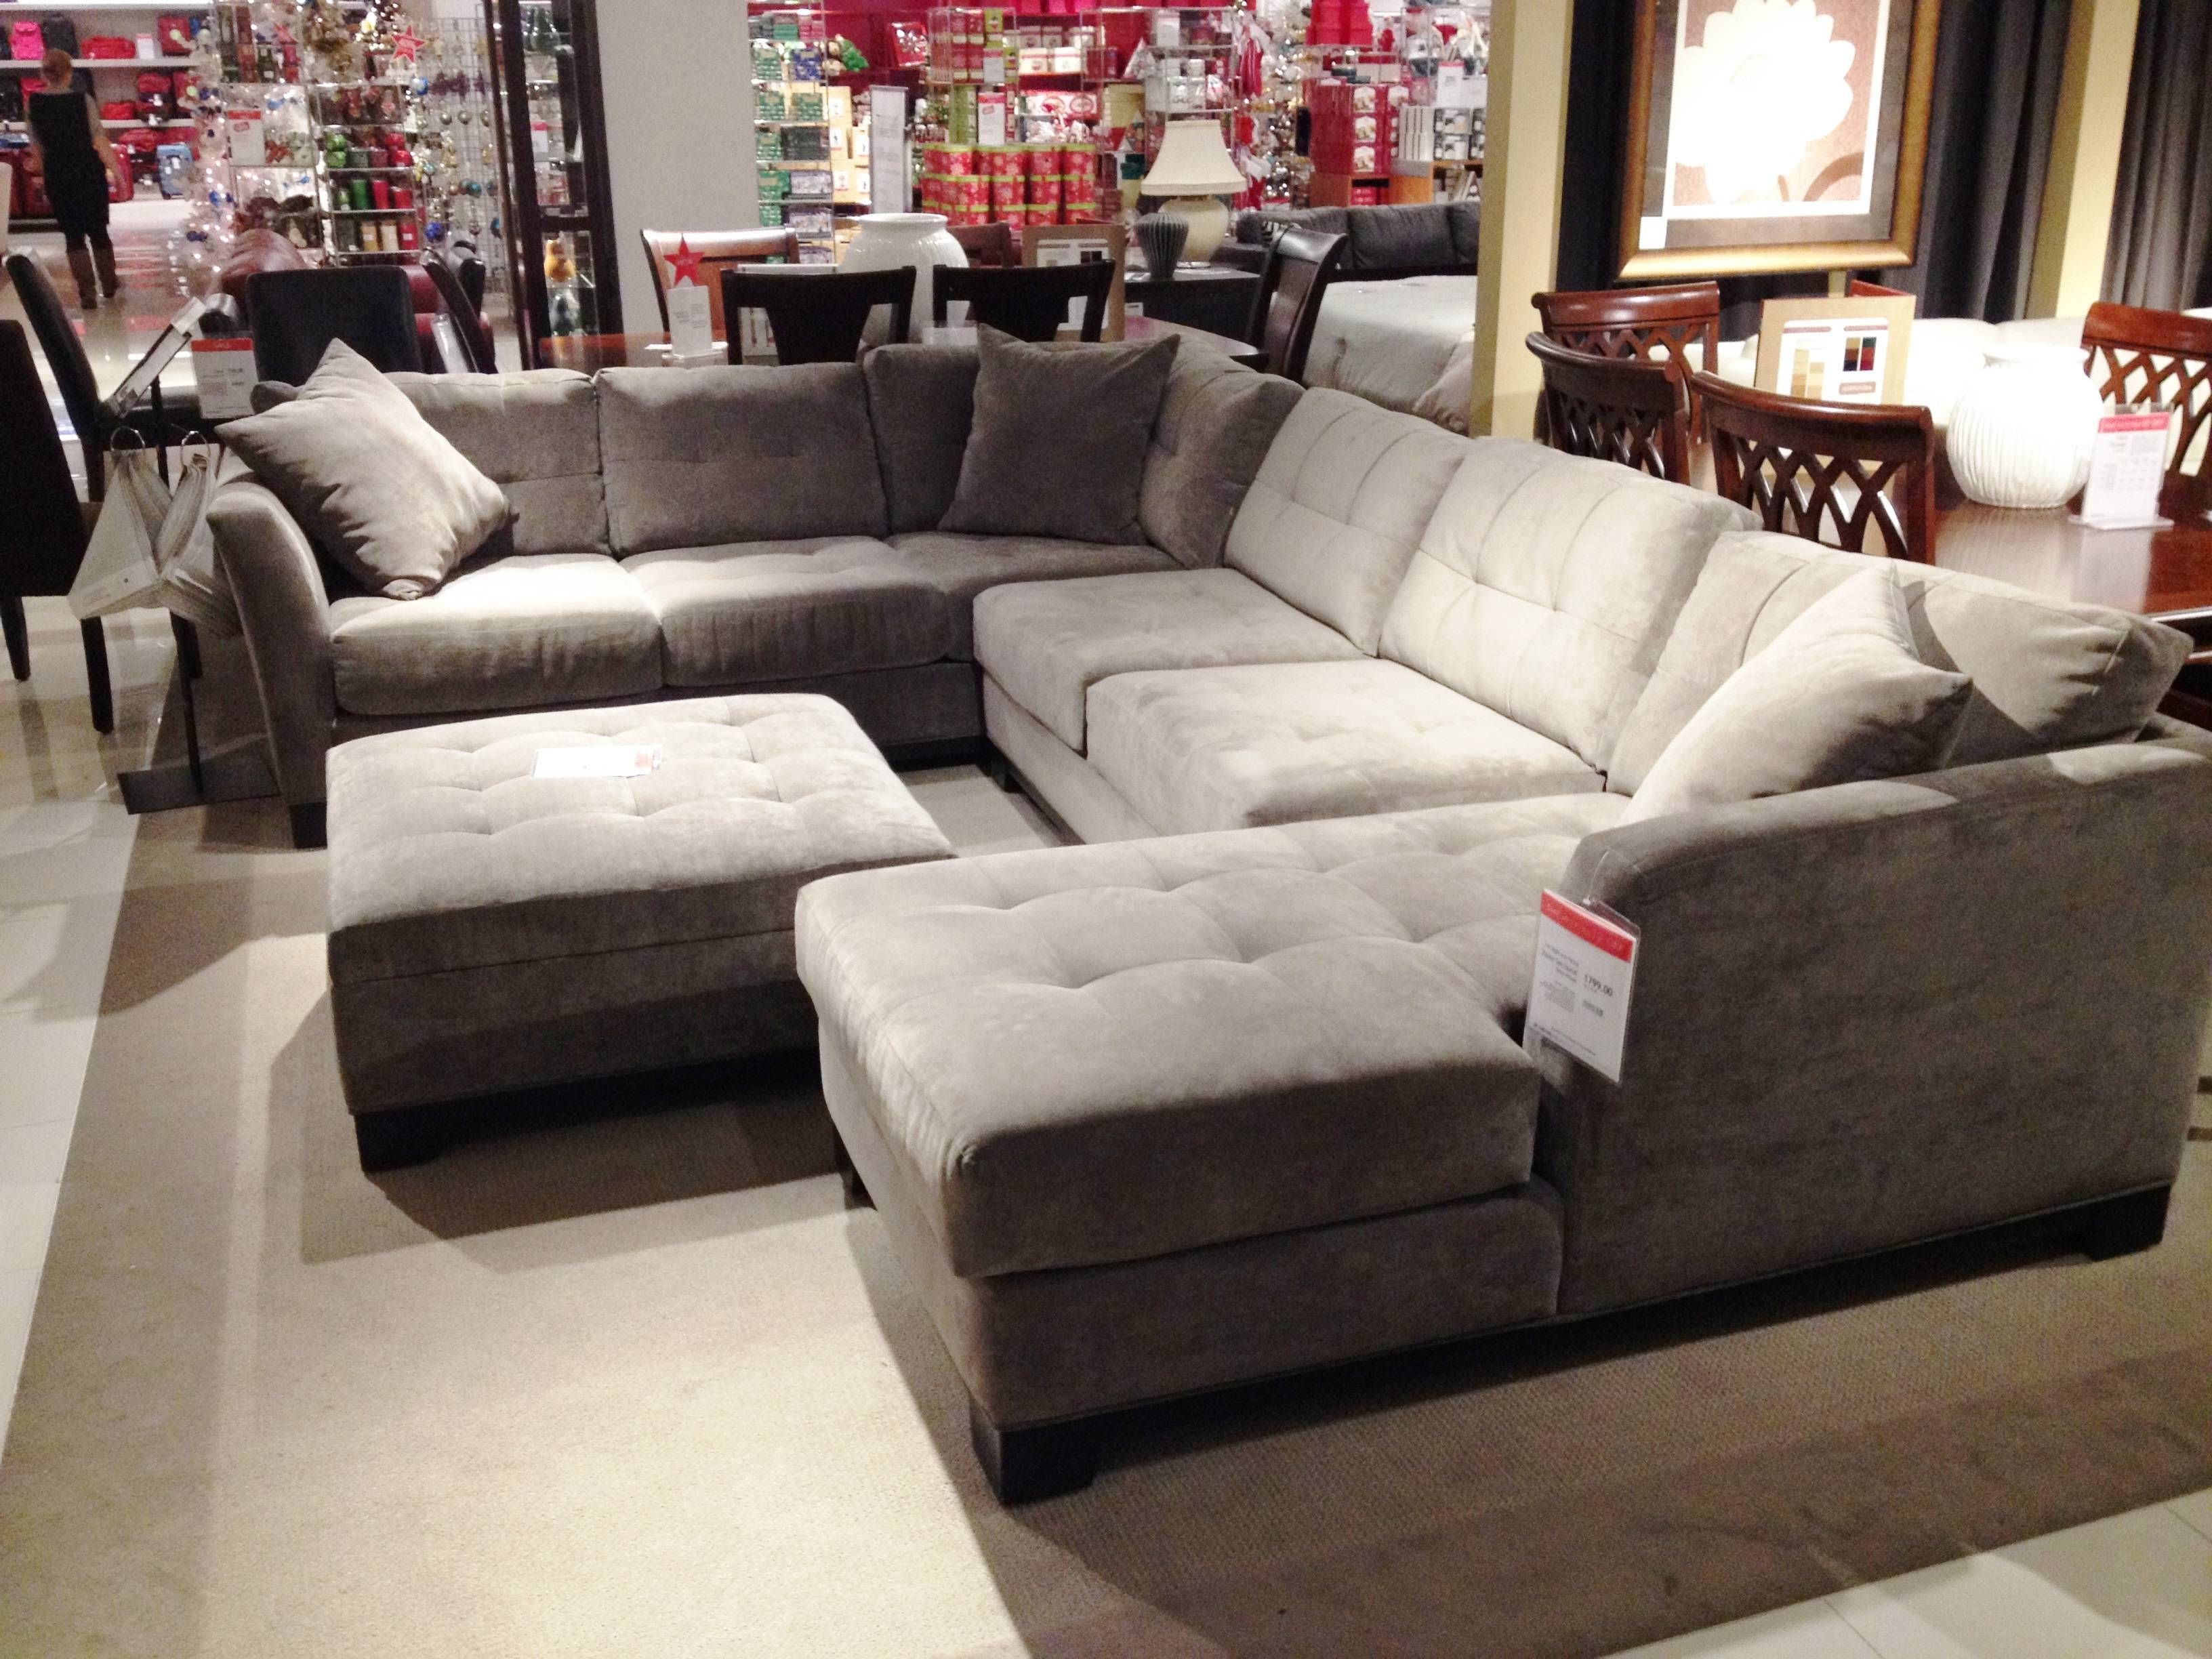 Sectional Sofas At Macys | Tehranmix Decoration For Macys Leather Sectional Sofa (View 2 of 25)